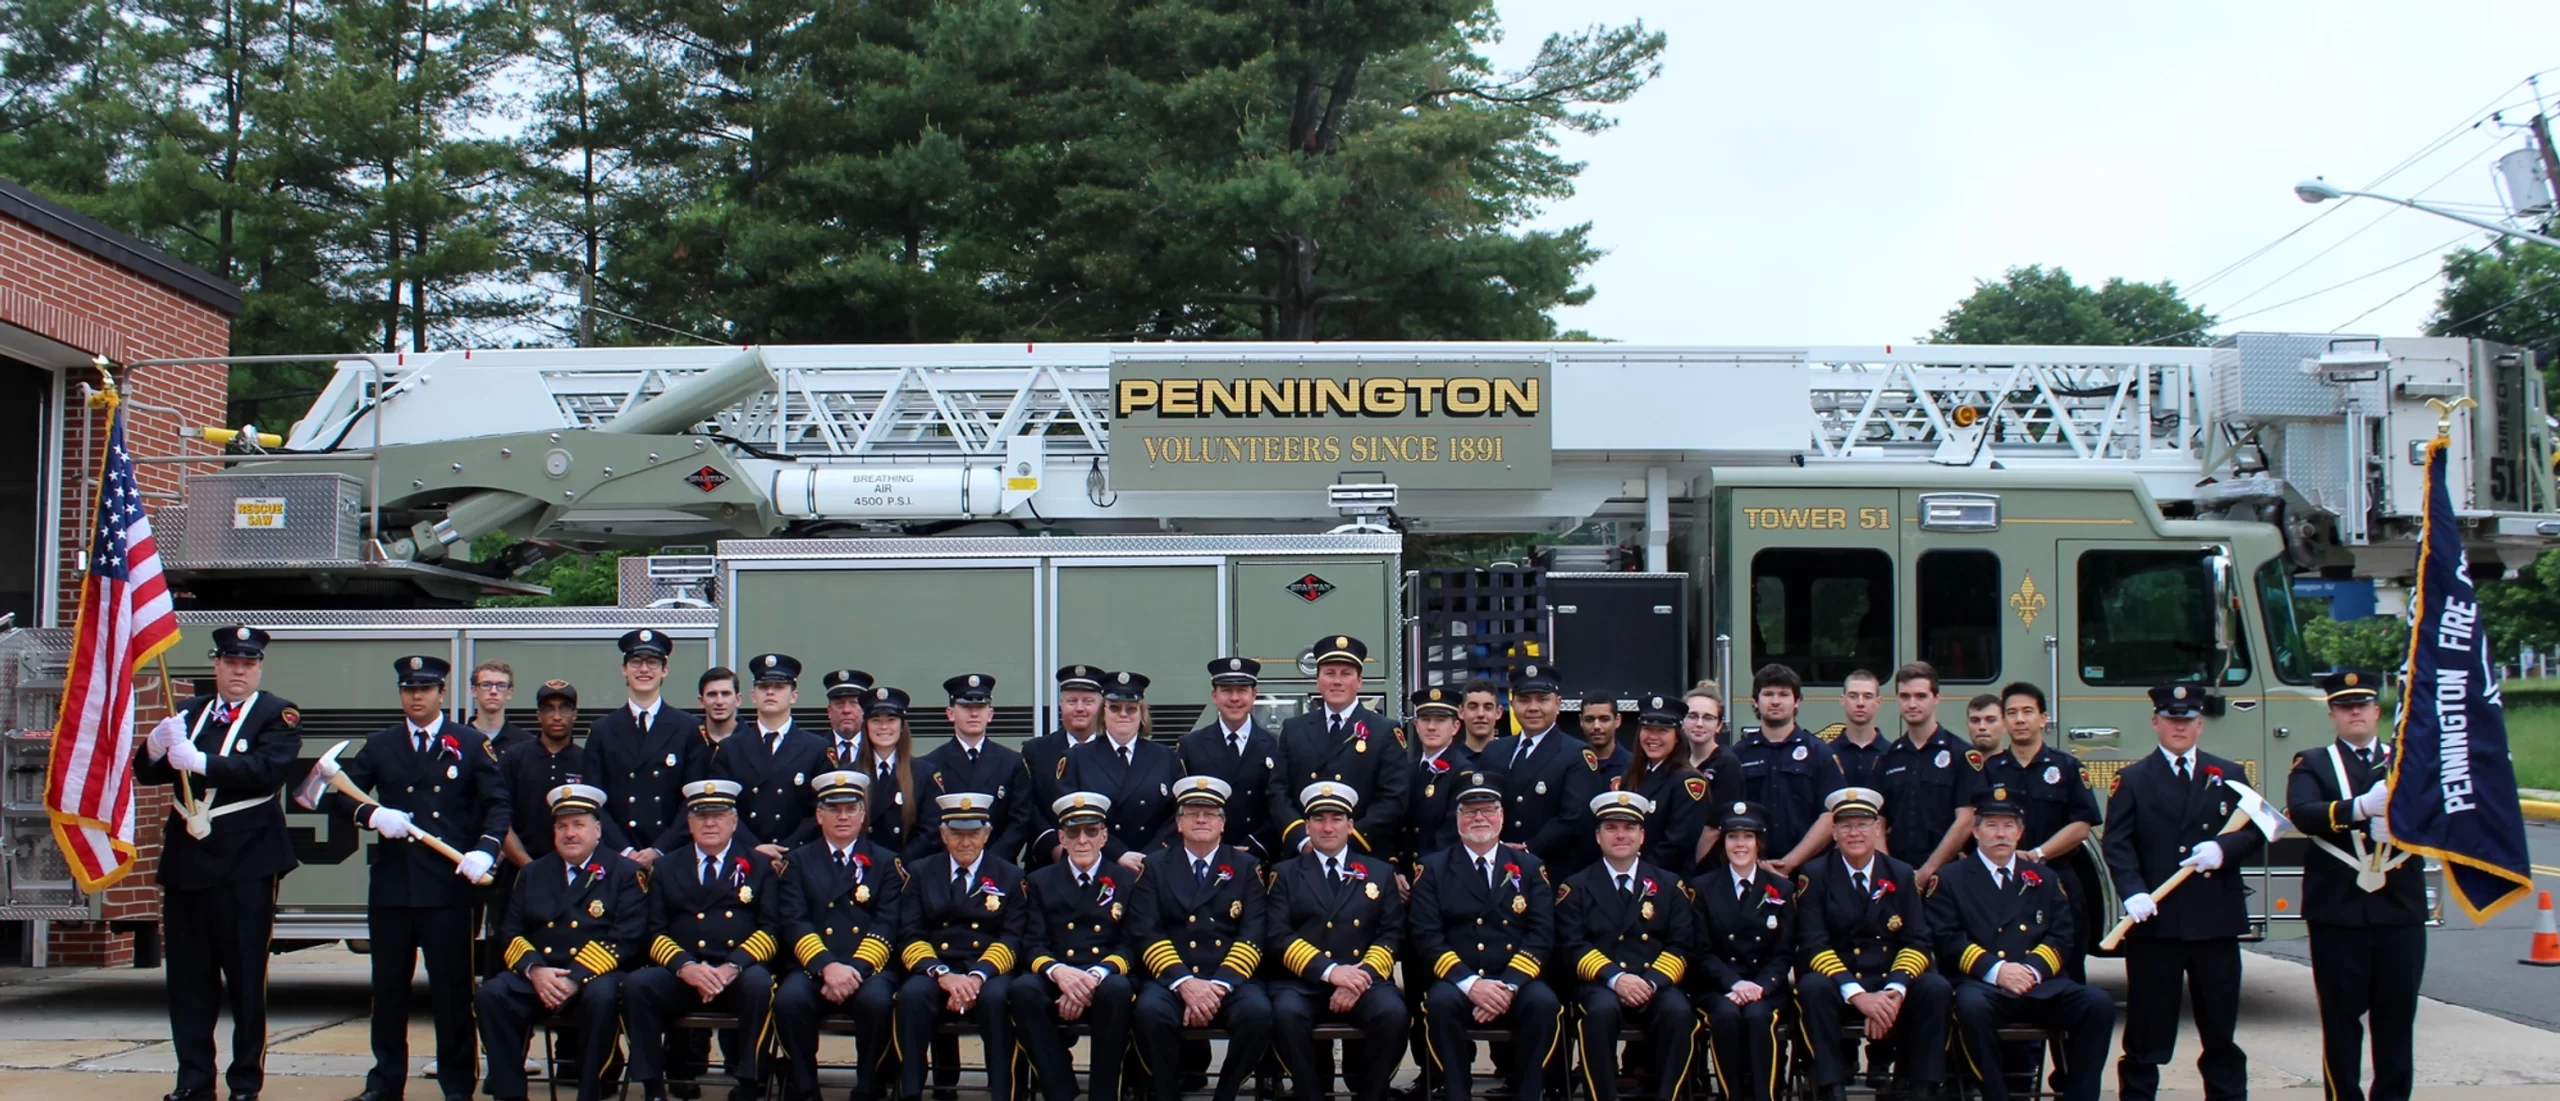 Group photo of the members of the pennington fire company infront of the Tower Truck.